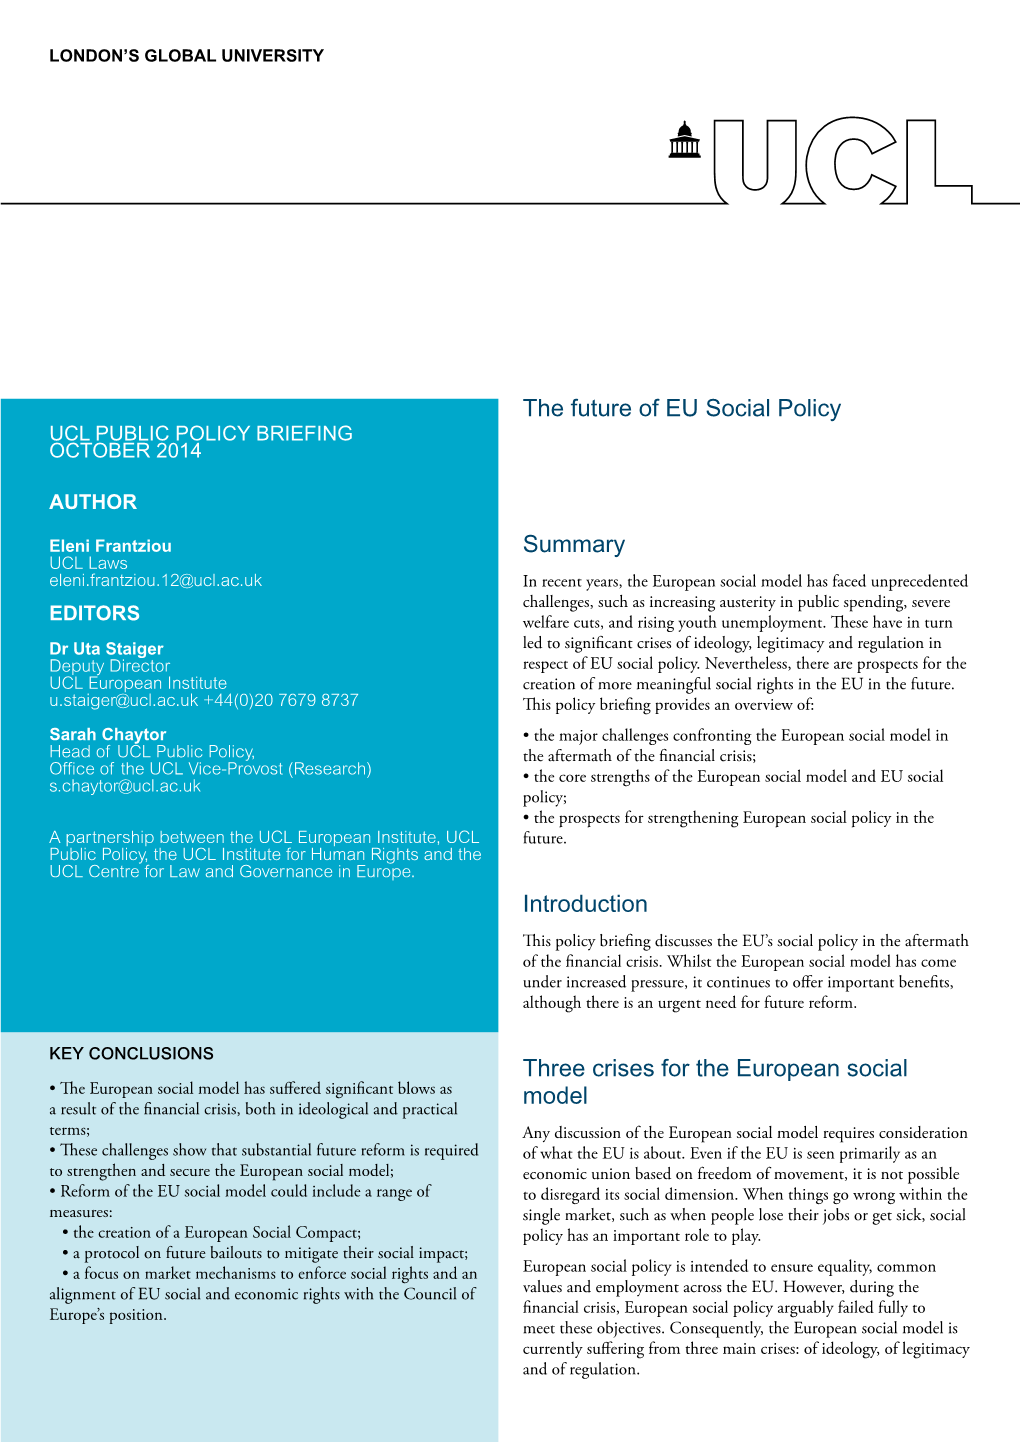 The Future of EU Social Policy Summary Introduction Three Crises for the European Social Model